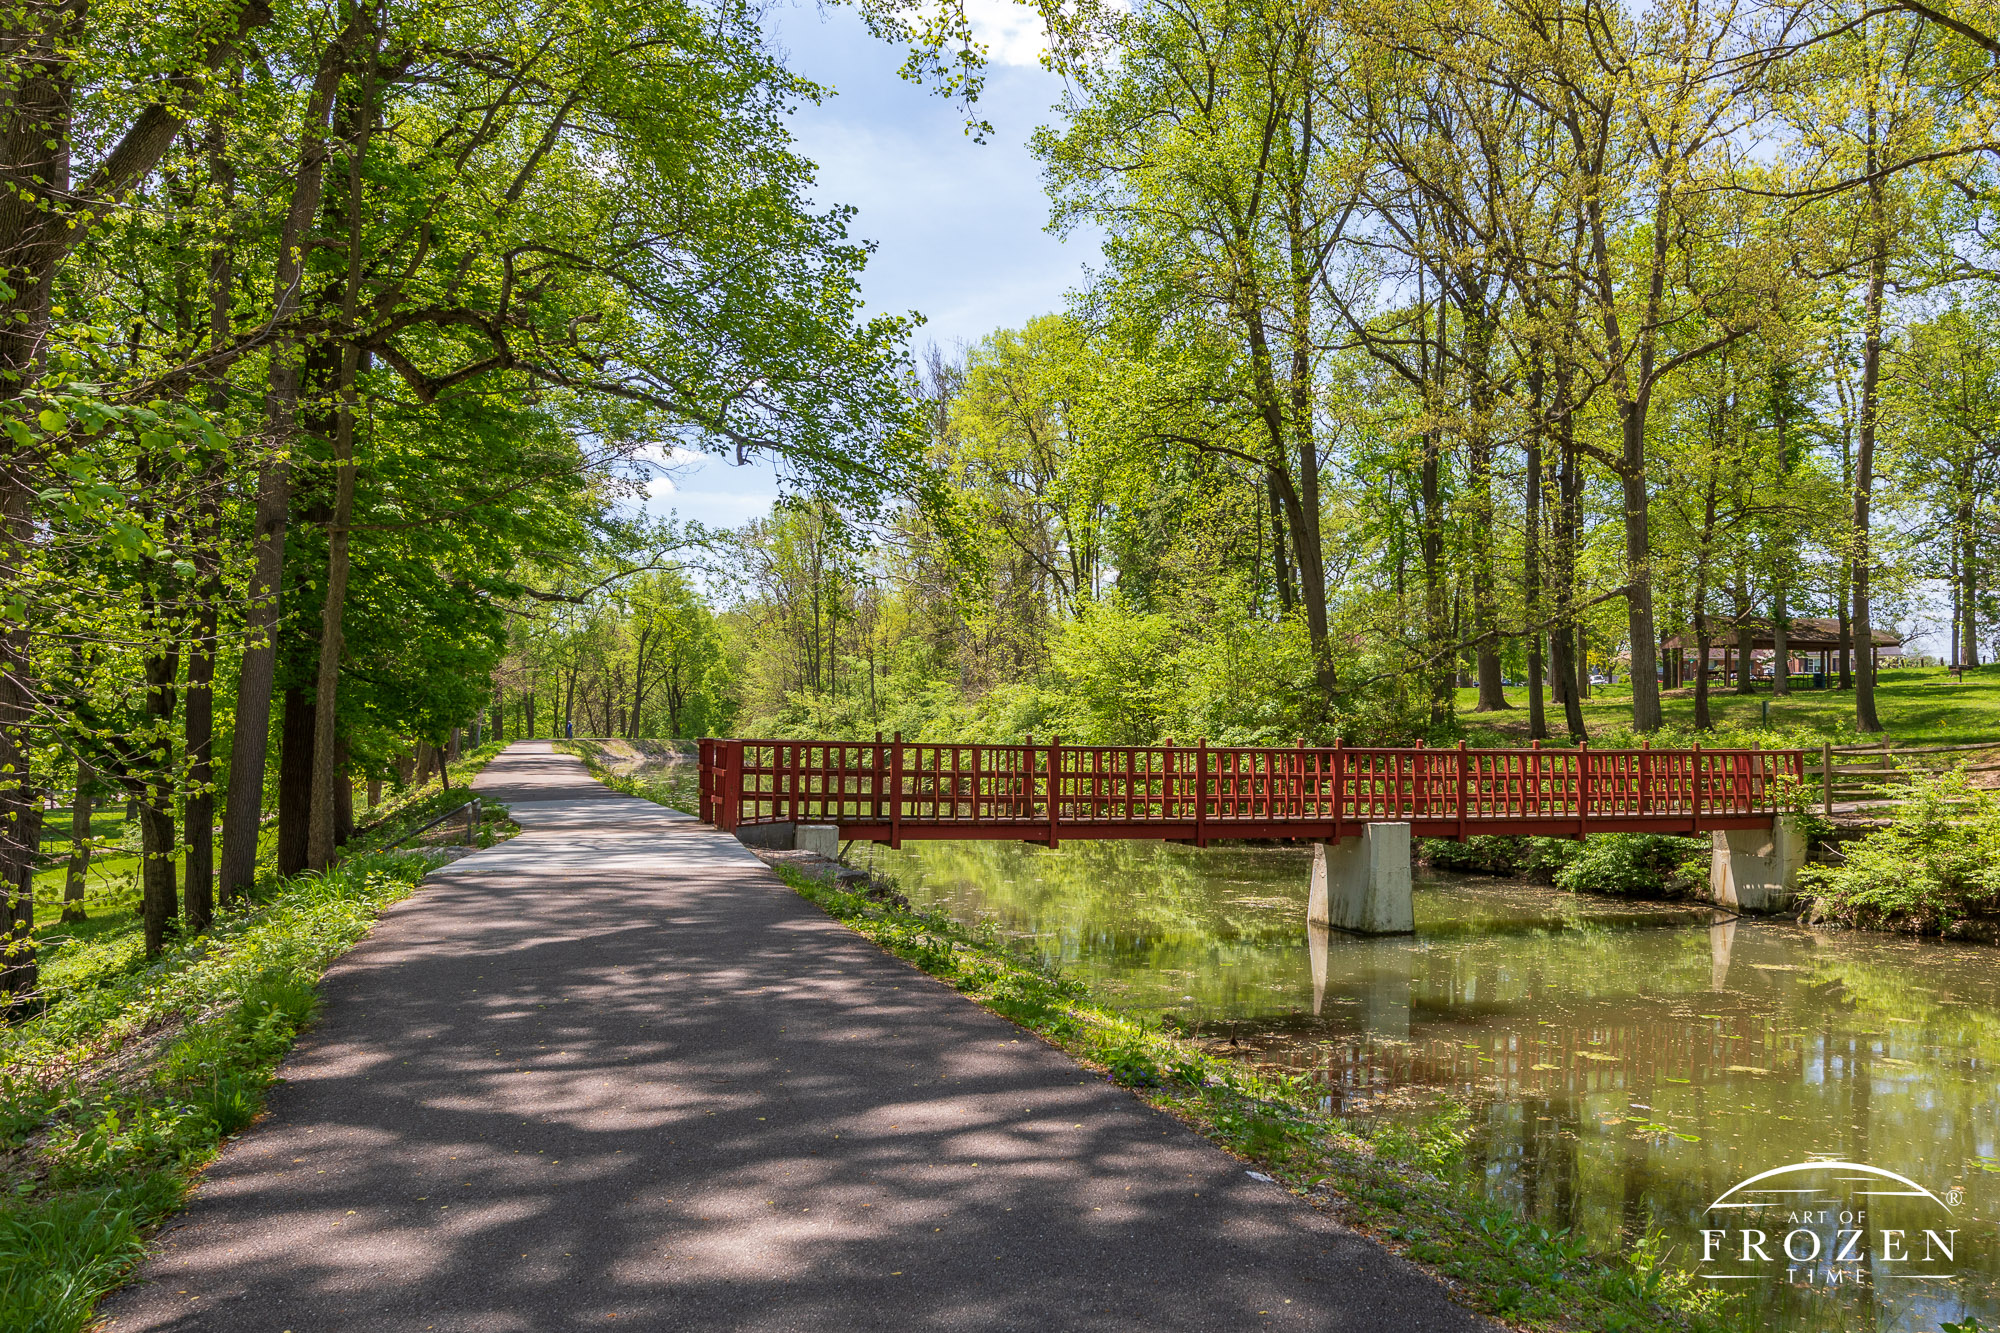 A decorative foot bridge spans Piqua Ohio’s Hydraulic Canal Run as bikers enjoy cool shade from the tree-lined pathway